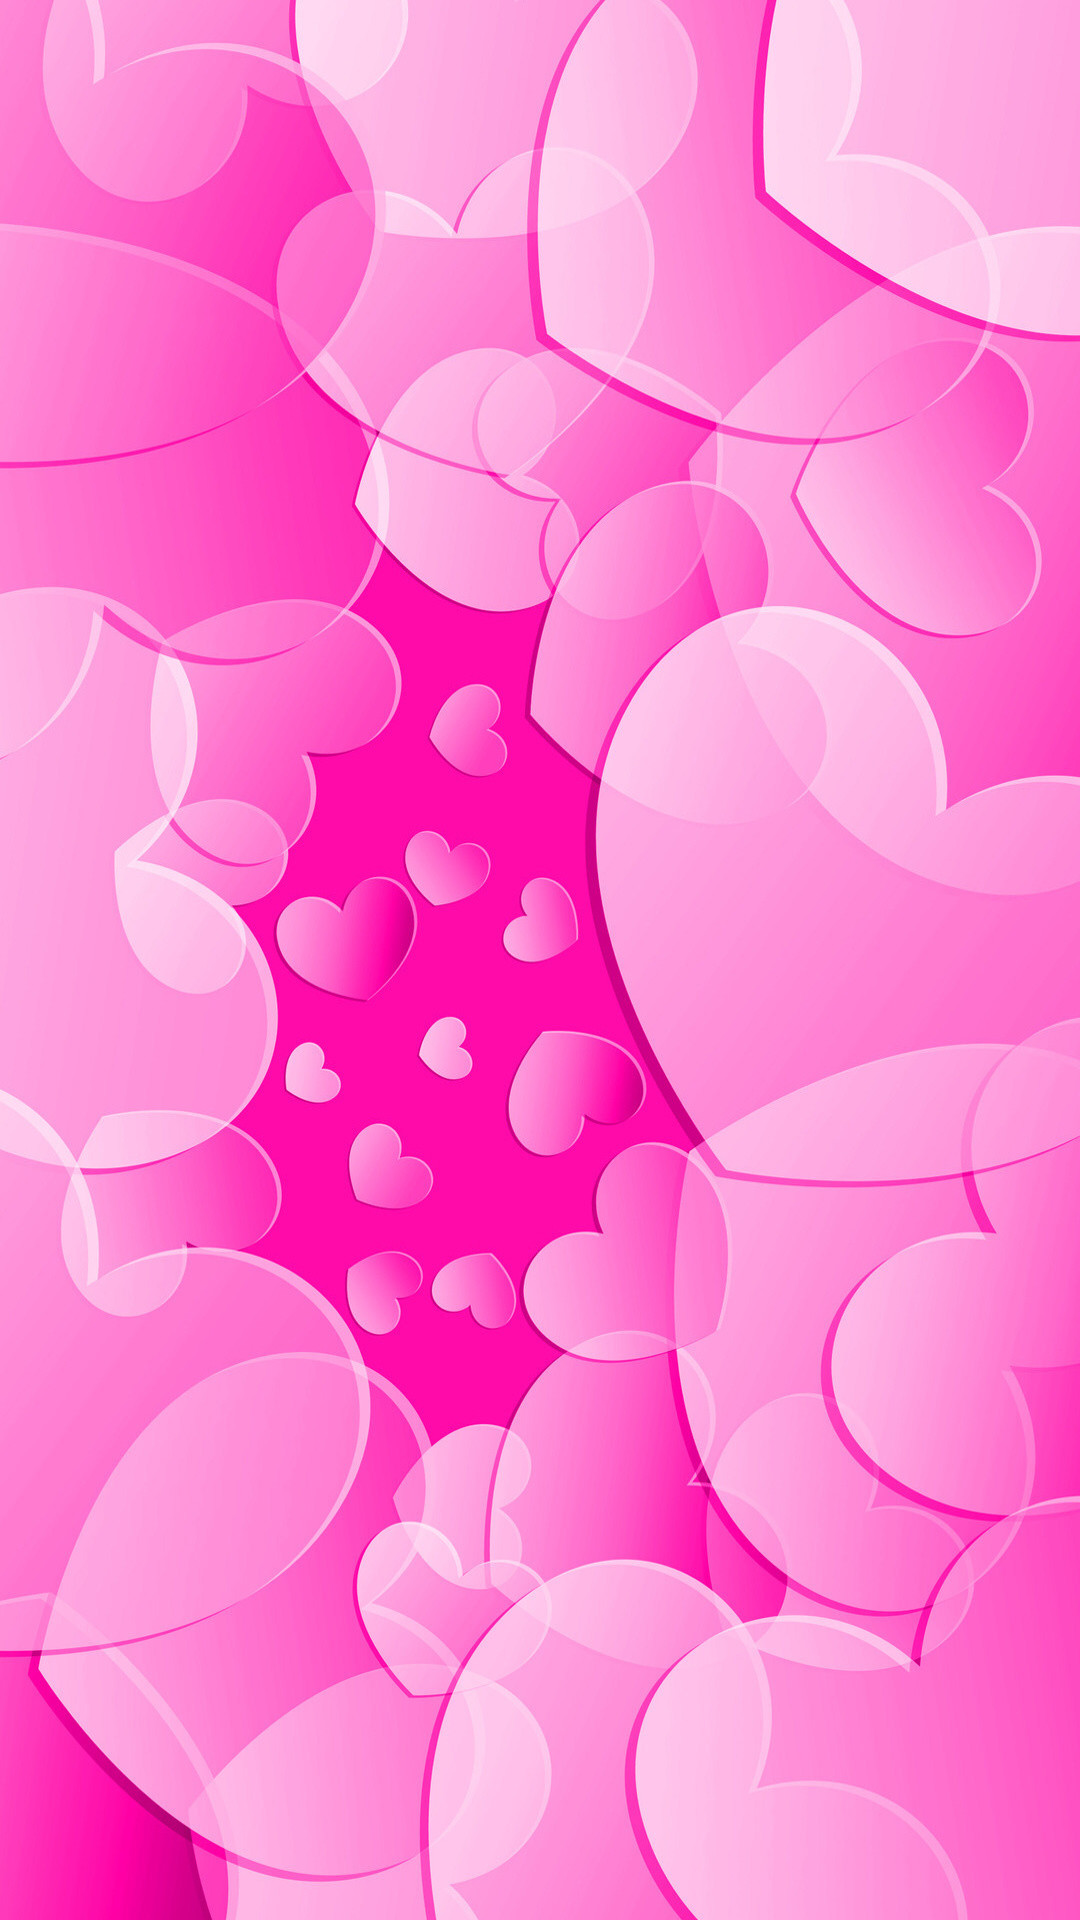 1080x1920 I'm really in a Pink mood this week. I'm Styling Pink Wallpapers for both  Home and Lock Screens today. They are both full of hearts, is love in the  air?